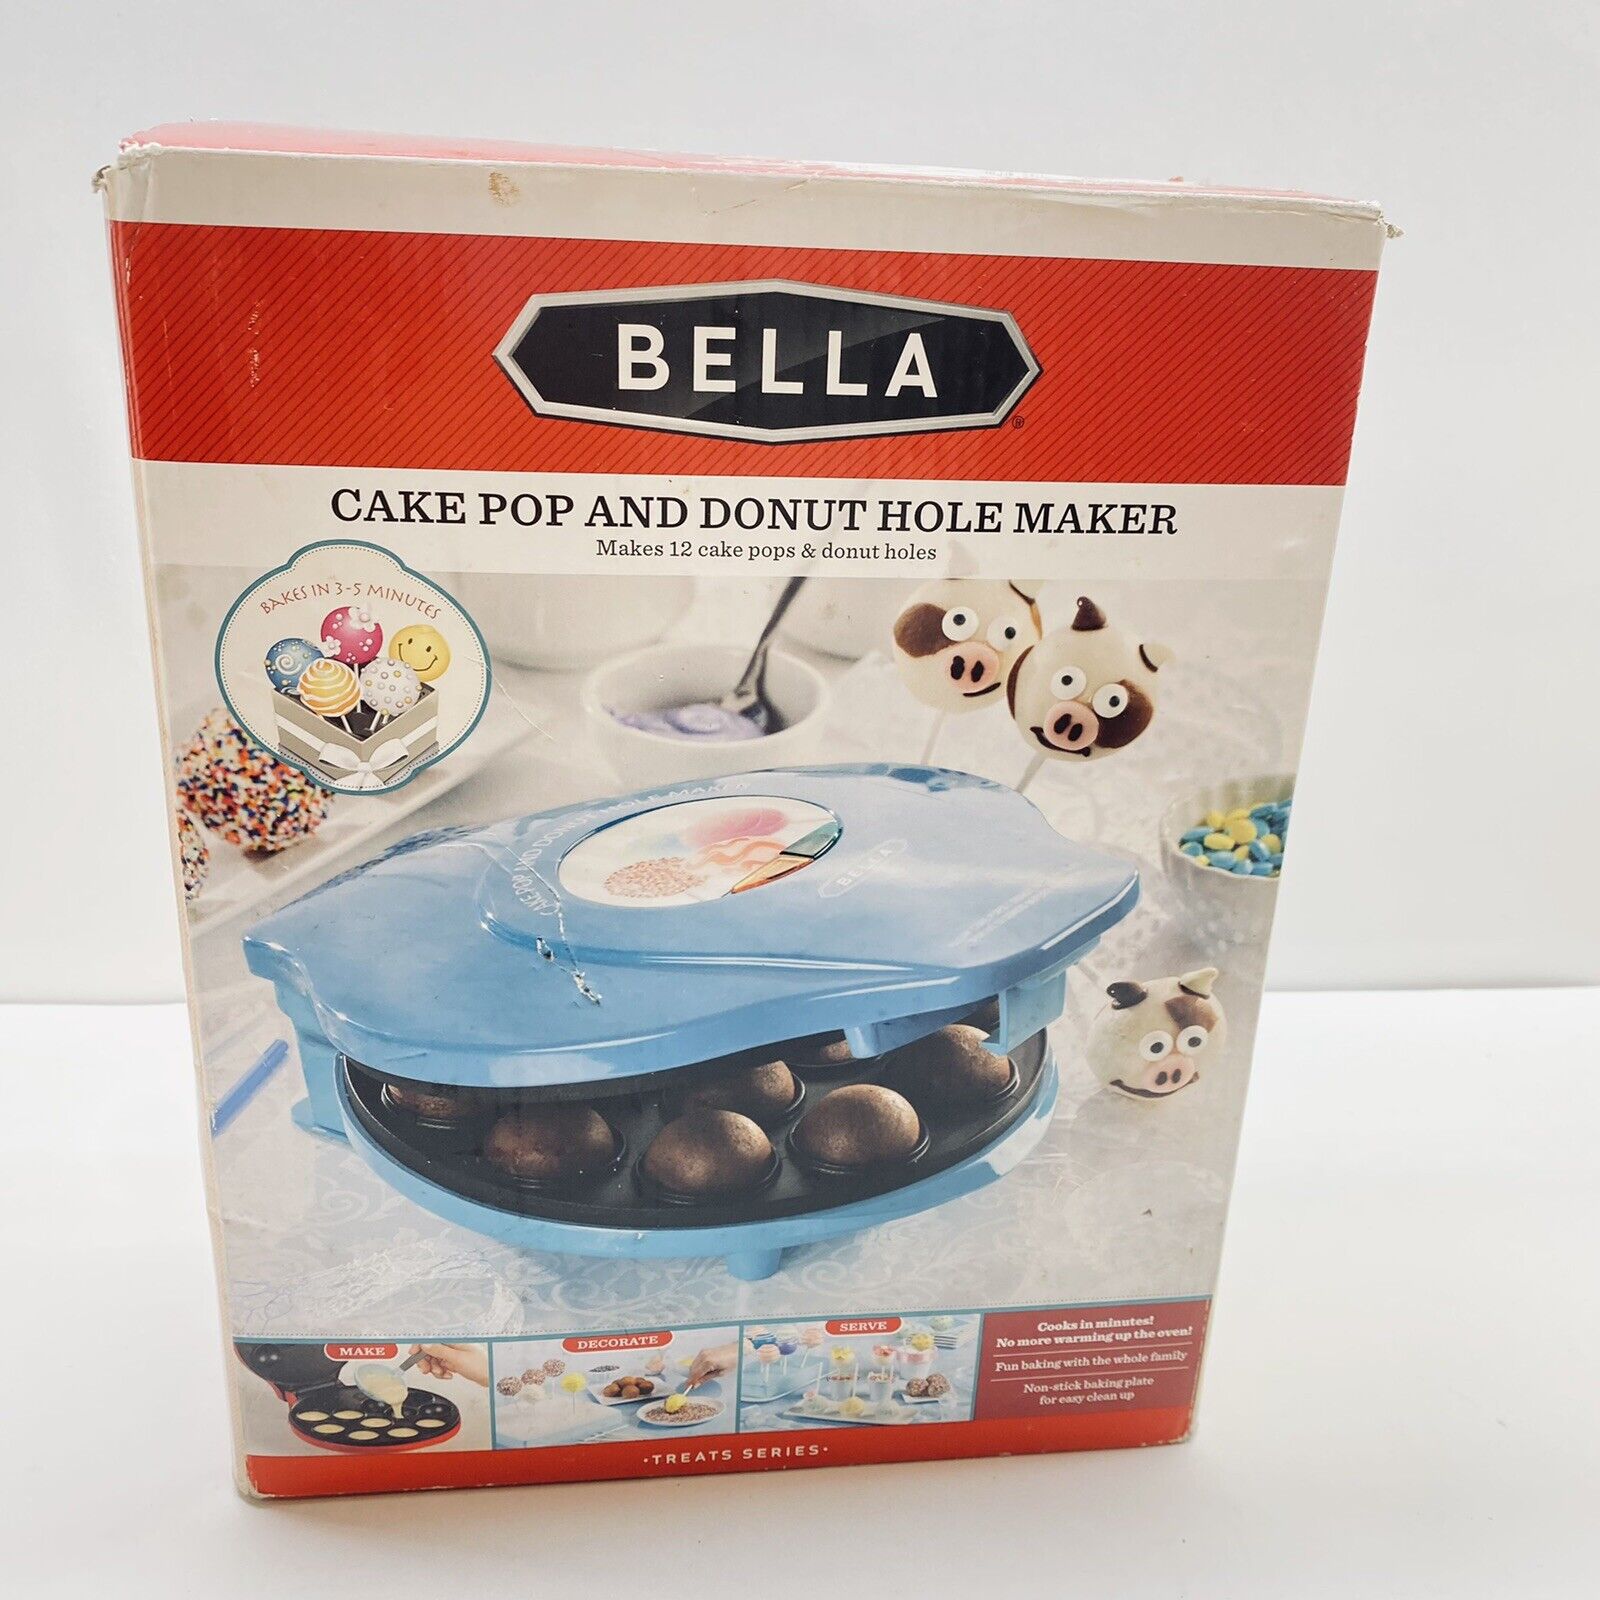 Cake Pop and Donut Hole Maker New in Open Box